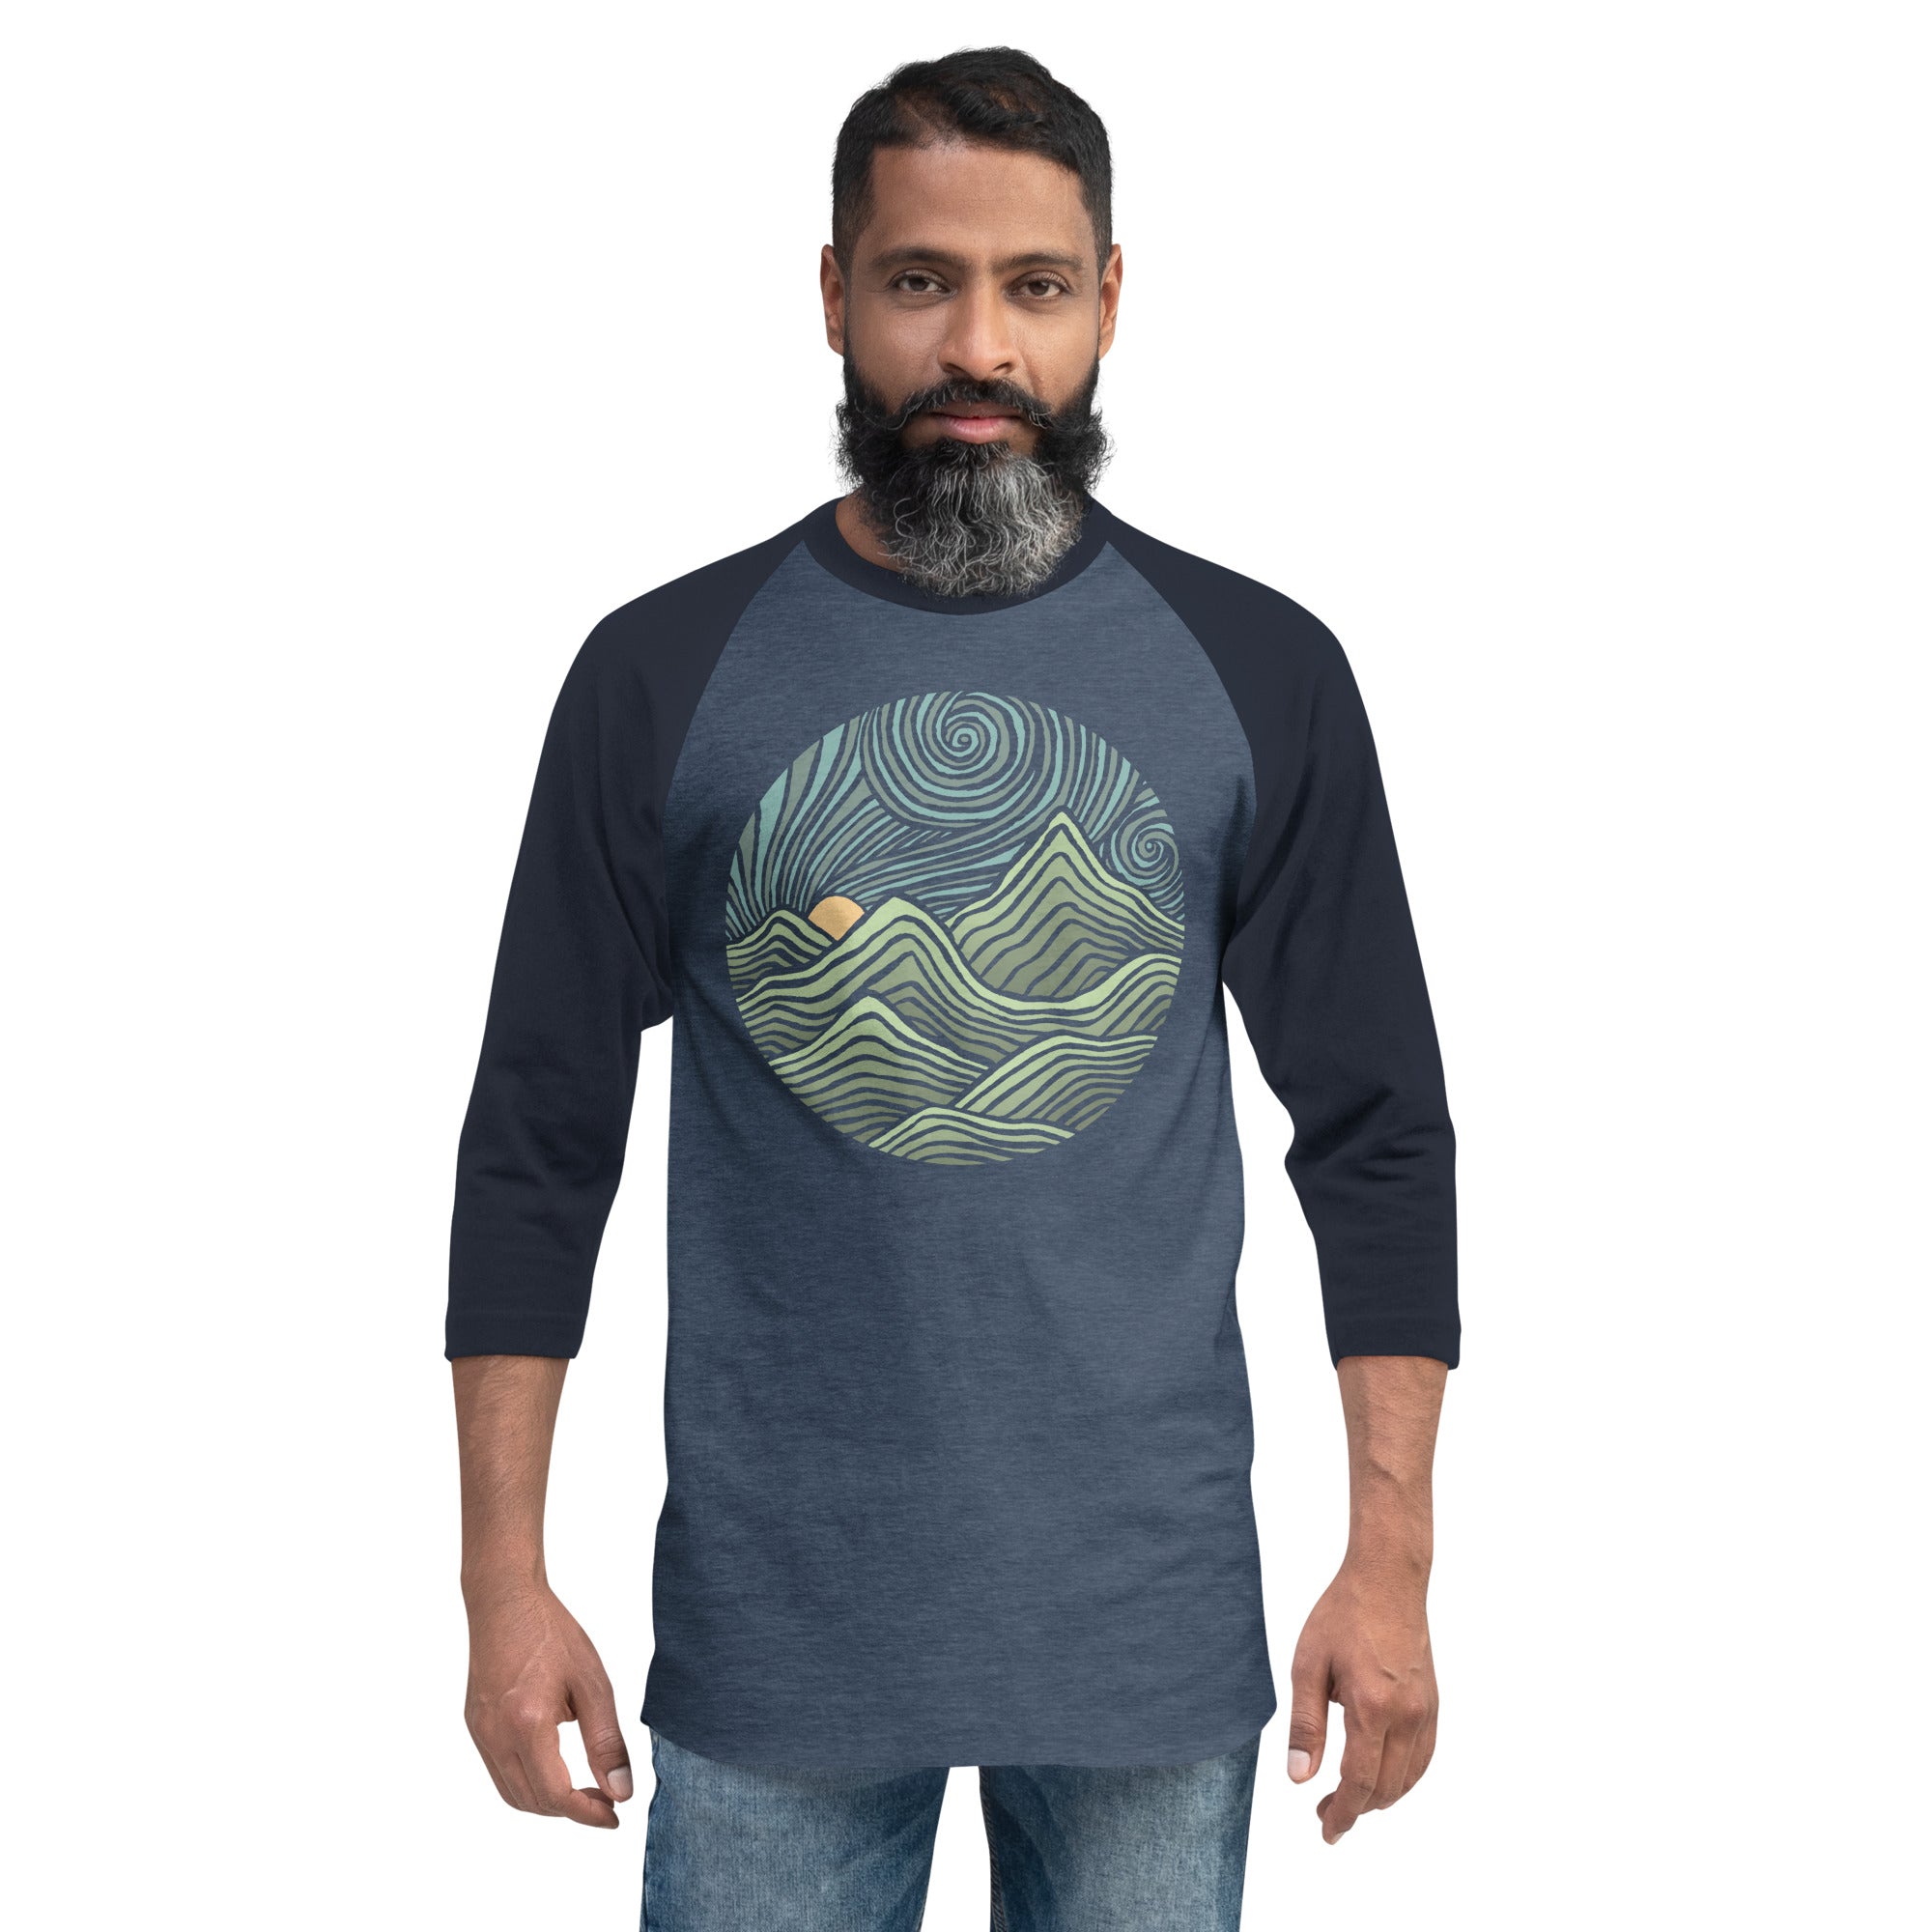 Swirly Mountains Vintage Graphic Raglan Tee | Cool Nature Baseball T-shirt on Male Model | Solid Threads